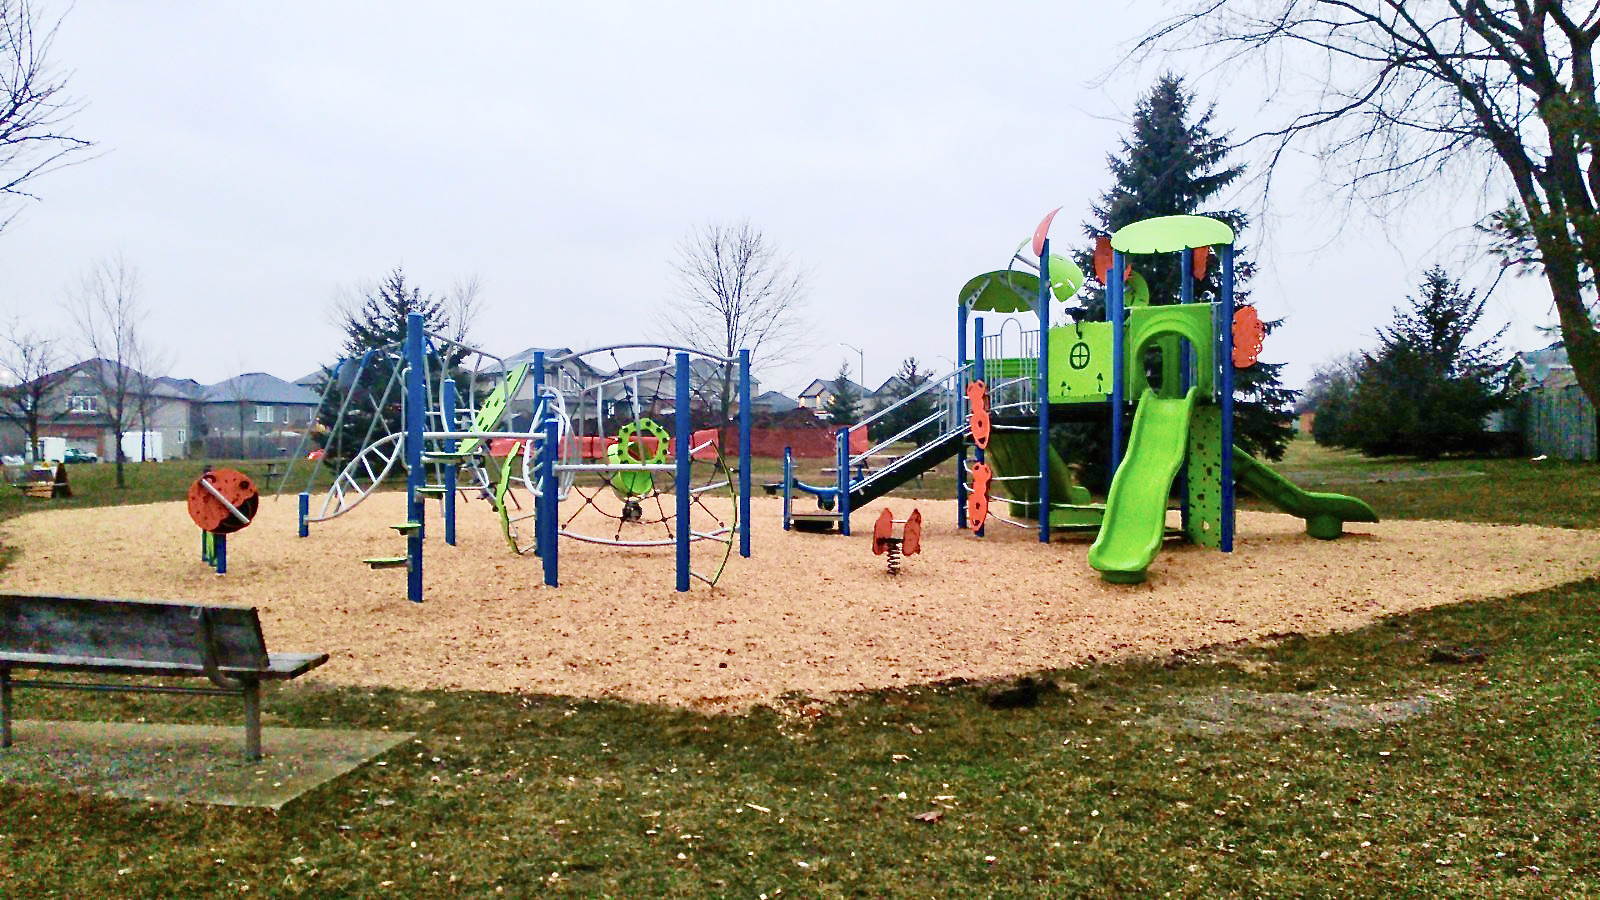 The Township of Wilmont has installed a new accessible and inclusive playground at Optimist Youth Park.